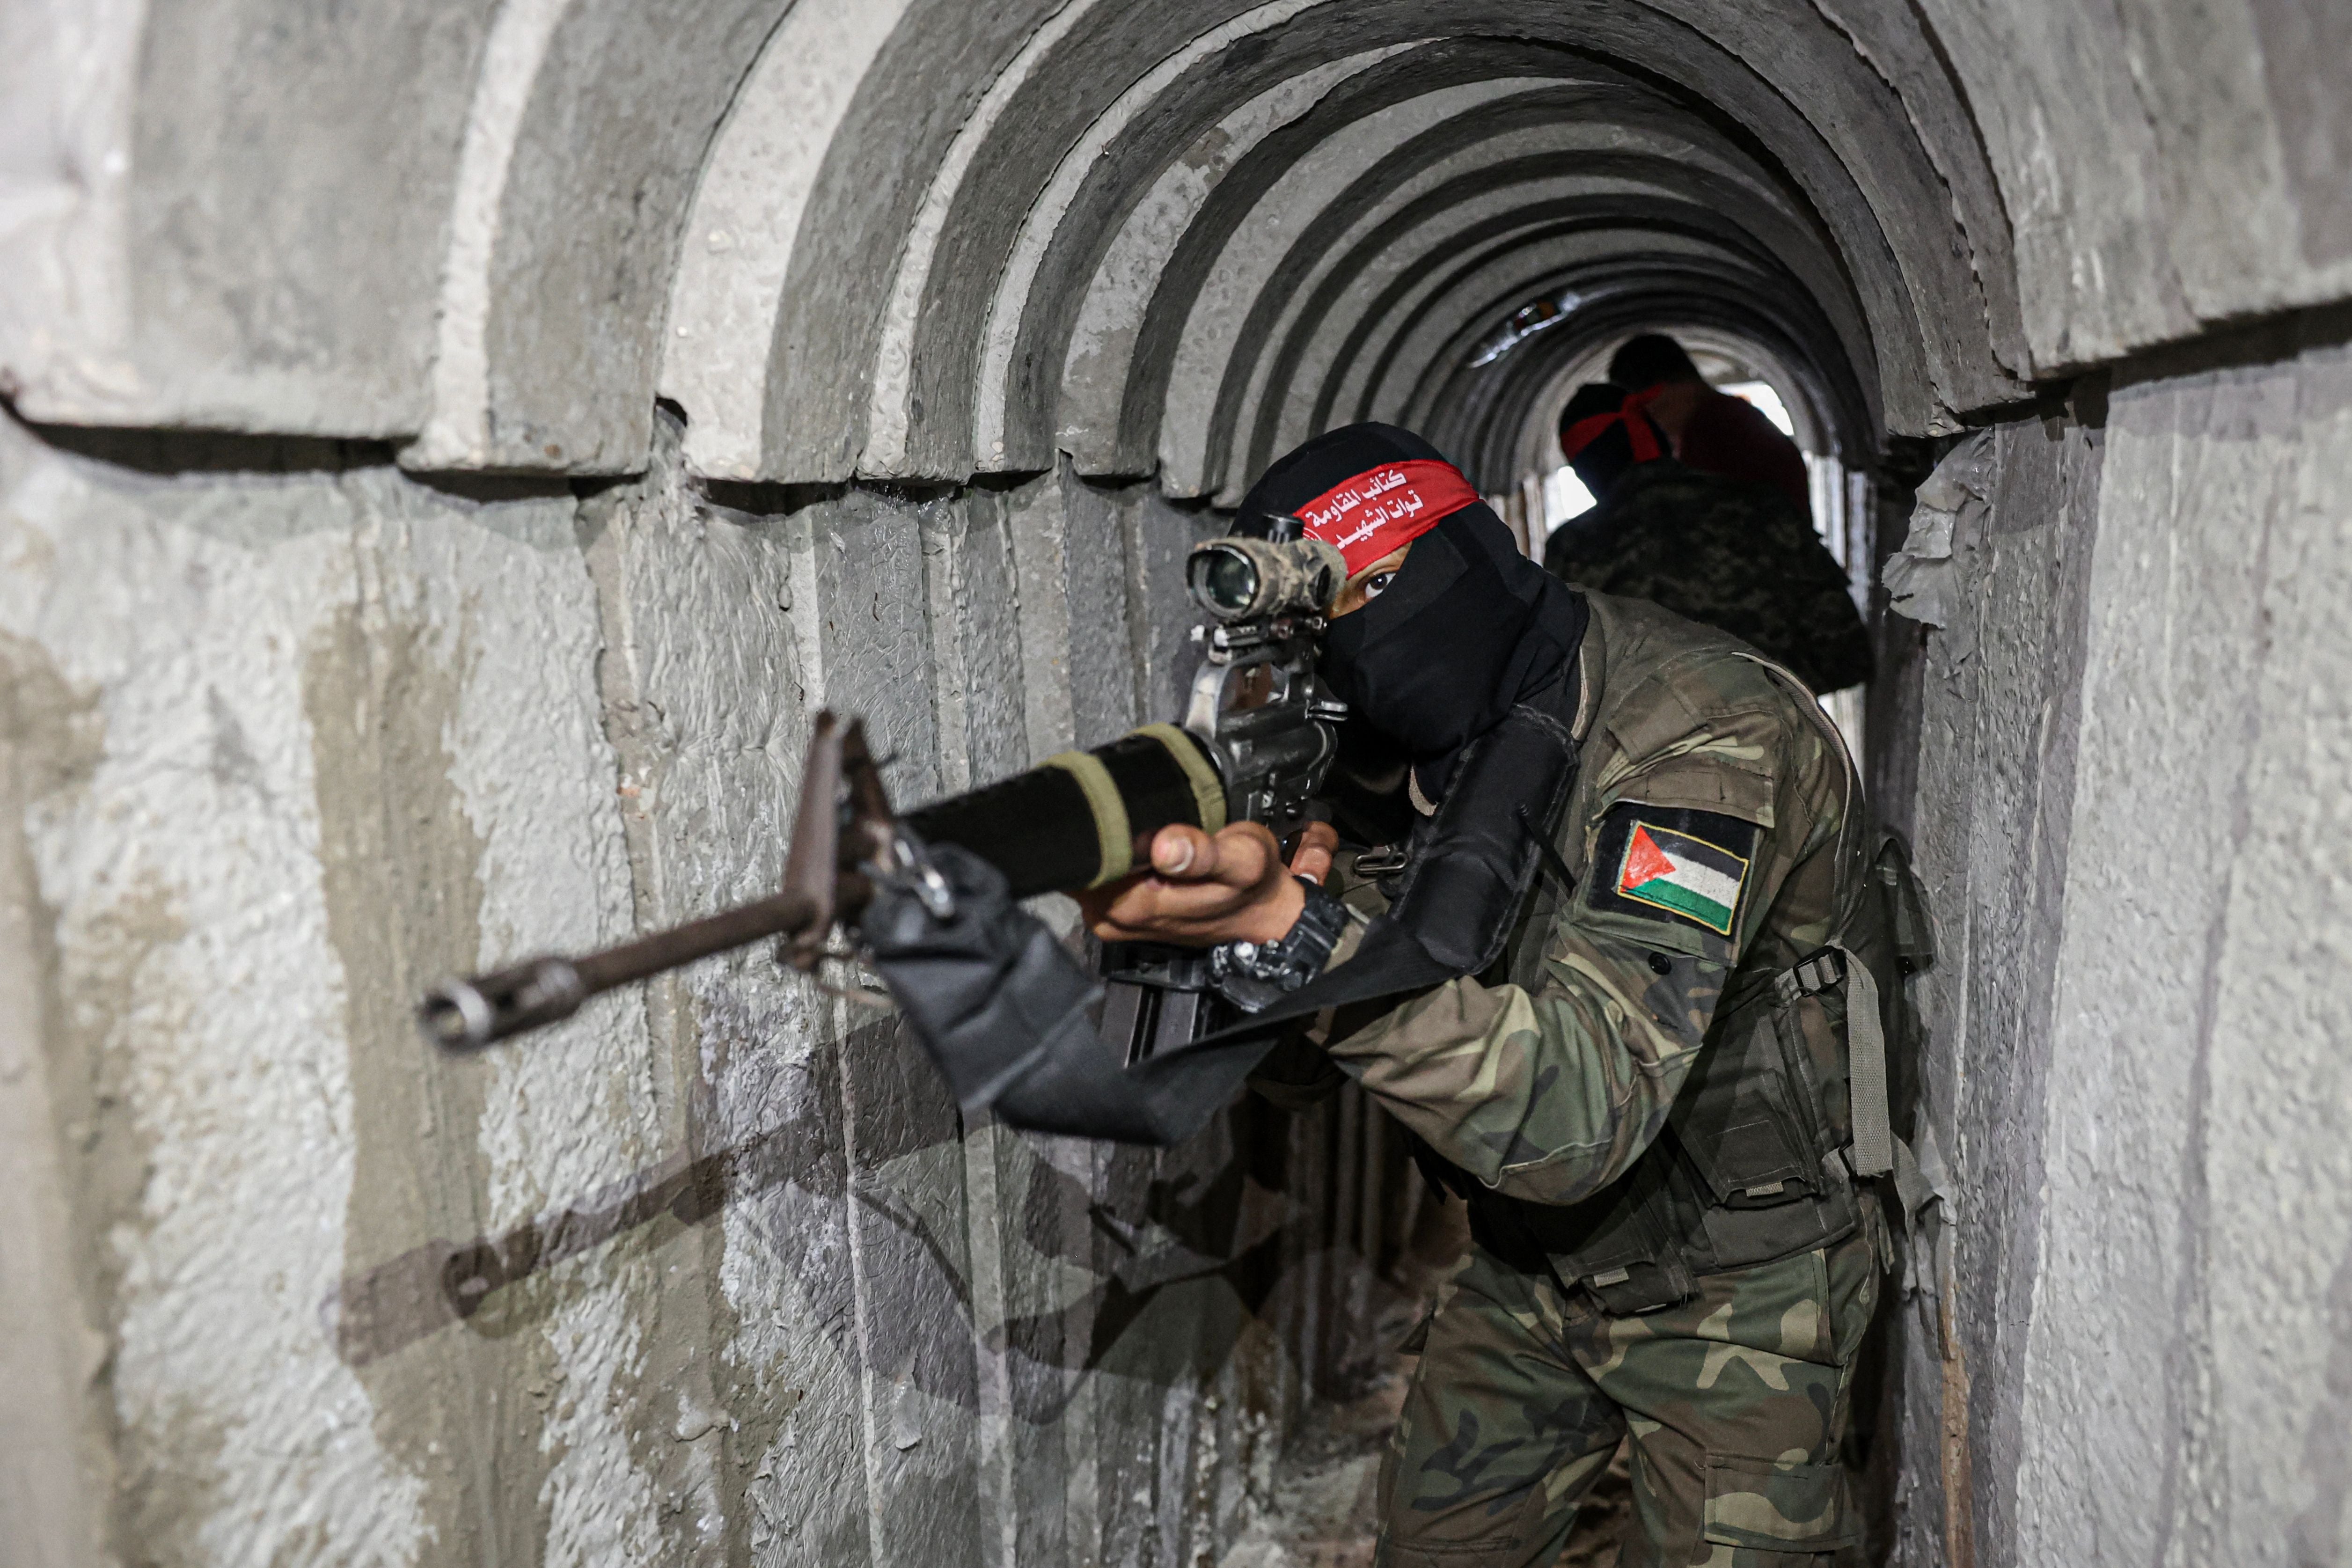 The full extent of the tunnel system in Gaza is still not known